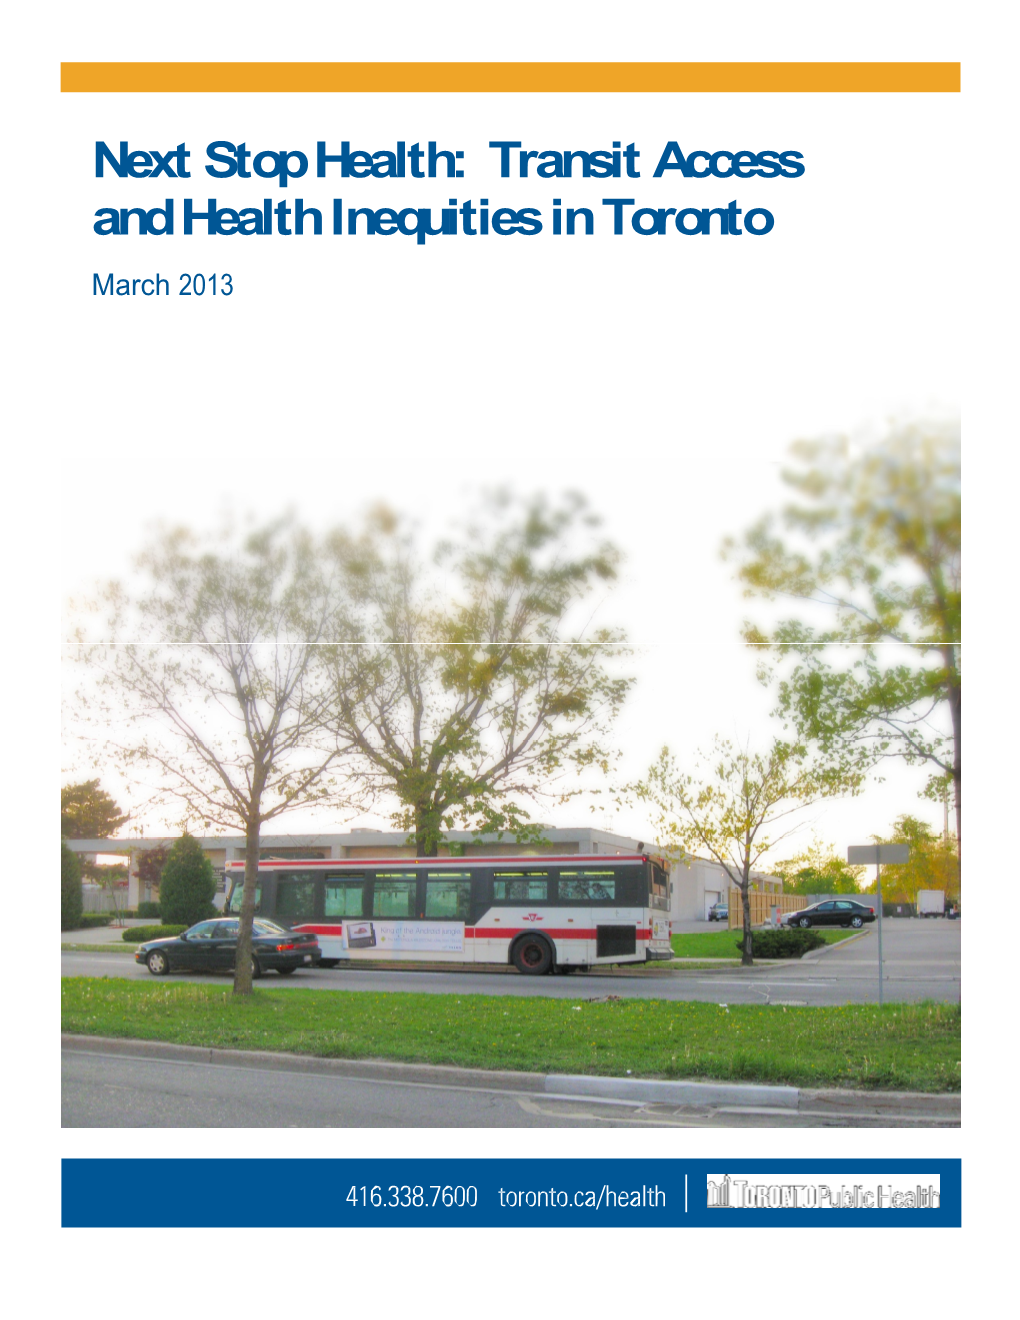 Next Stop Health: Transit Access and Health Inequities in Toronto March 2013